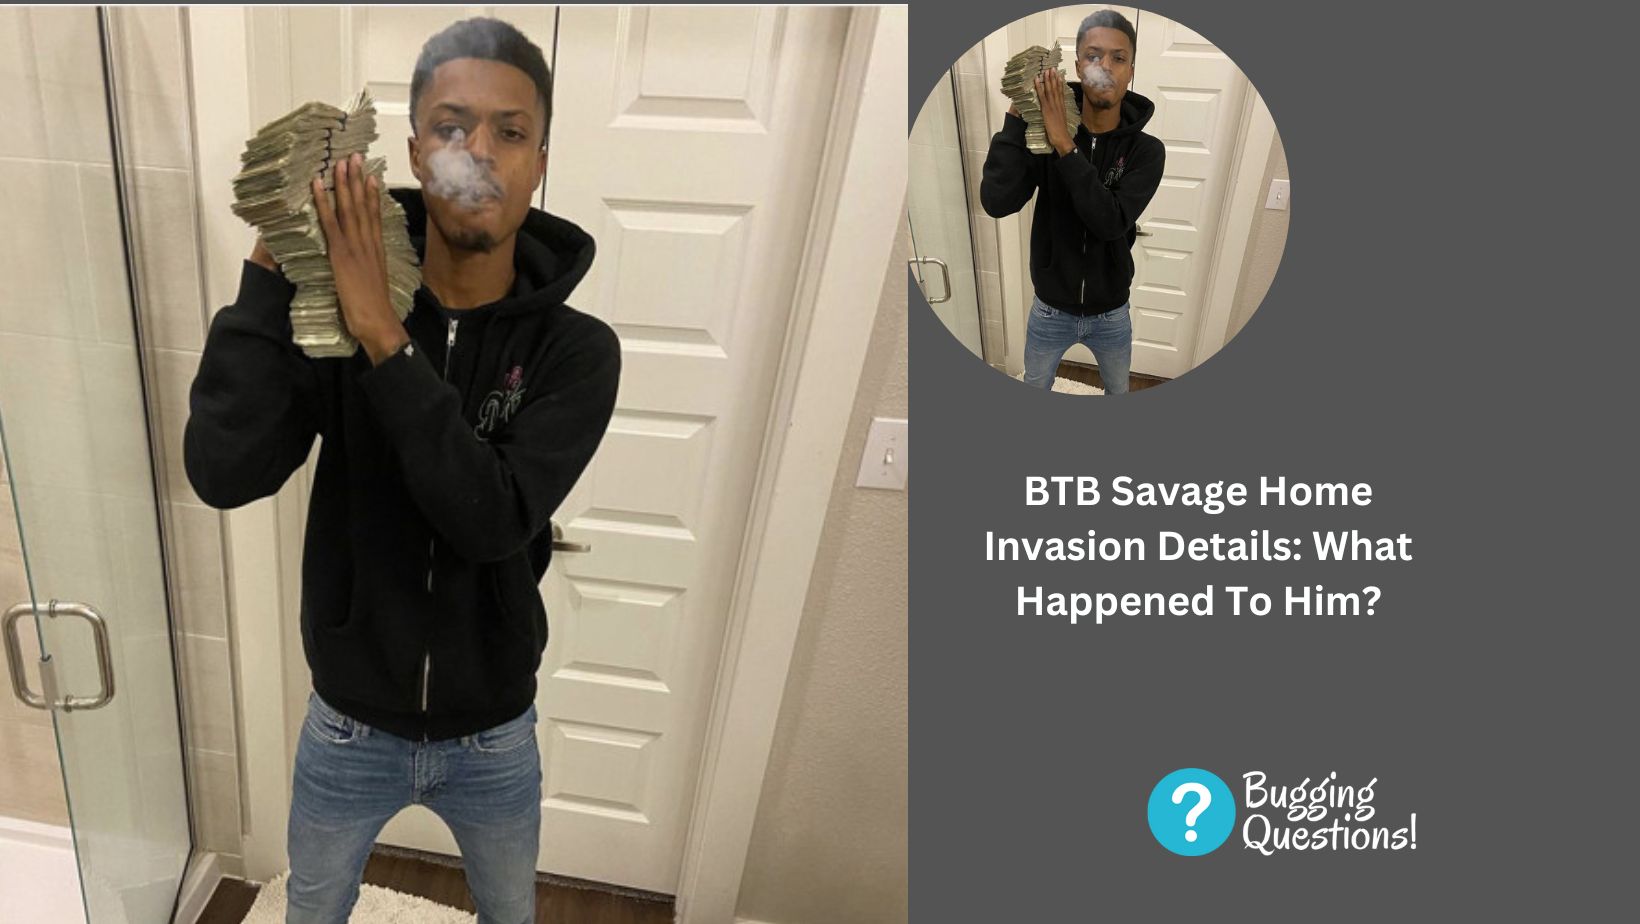 BTB Savage Home Invasion Details: What Happened To Him?